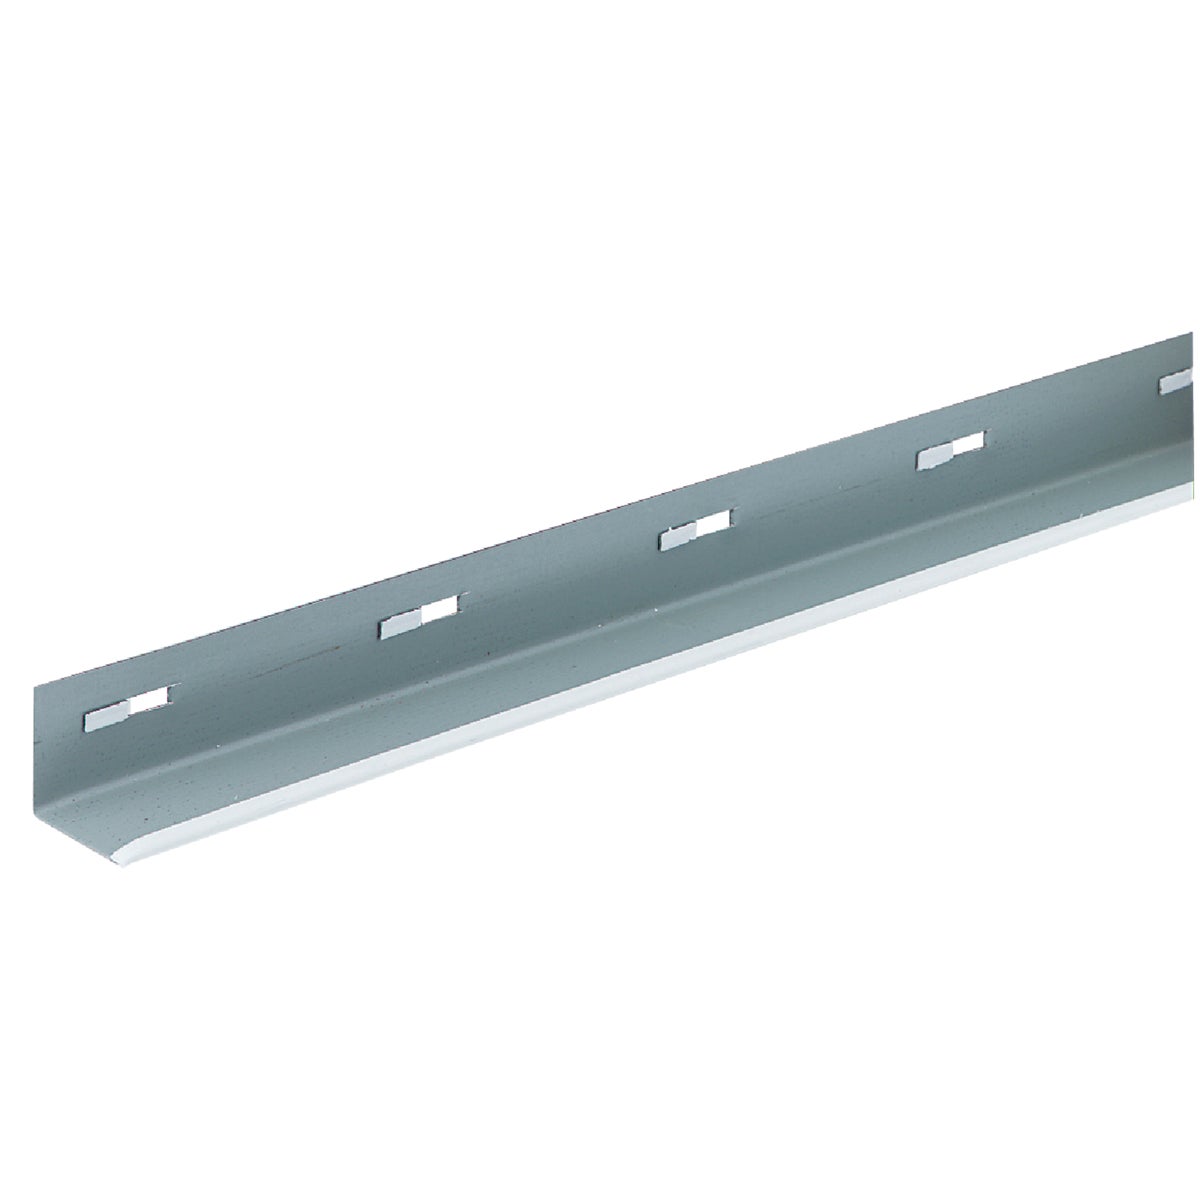 SM5-050 Donn Ceiling Wall Molding angle wall